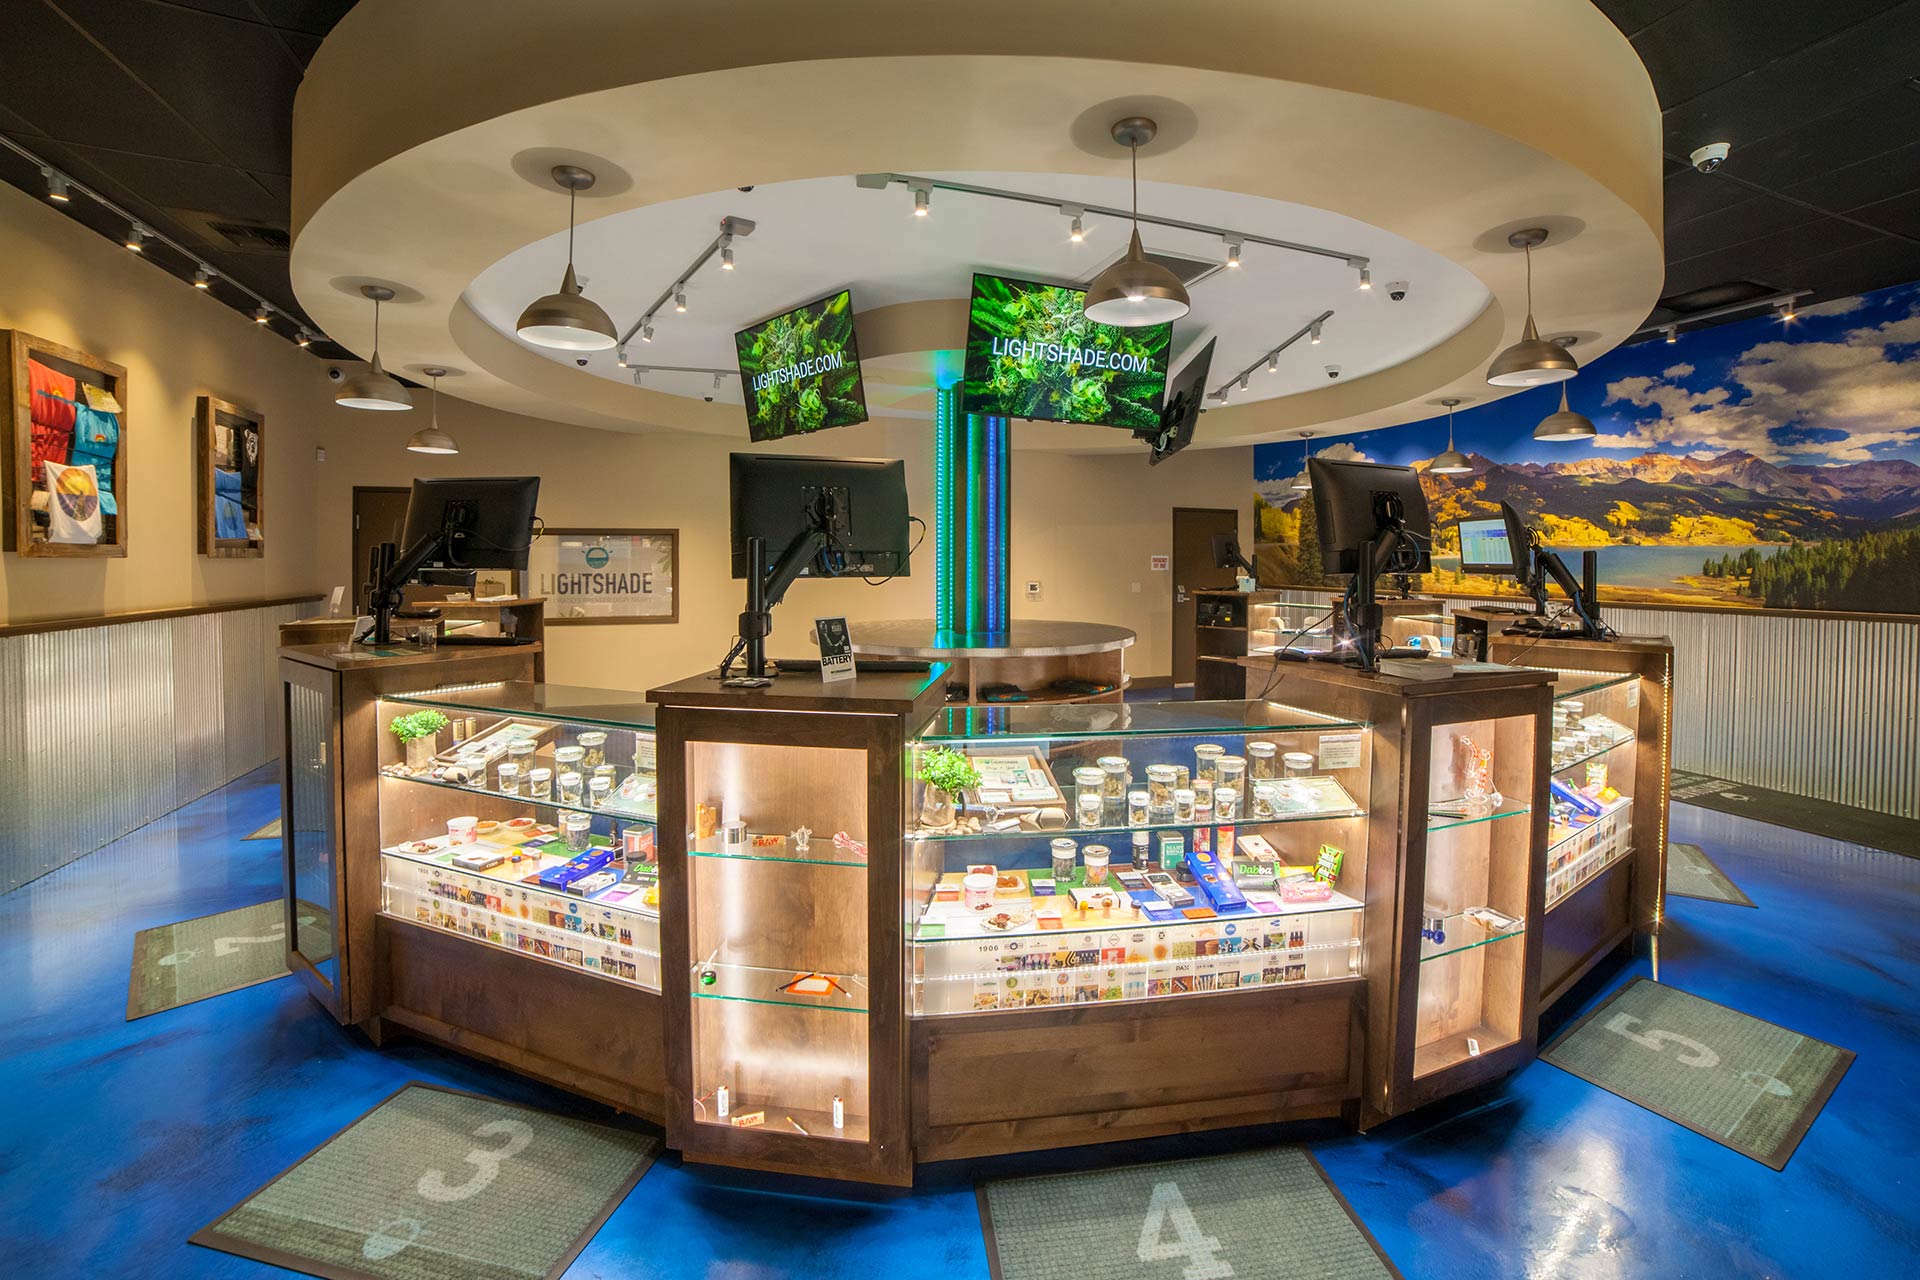 Cannabis Order Counter inside the Lightshade Federal Heights Dispensary